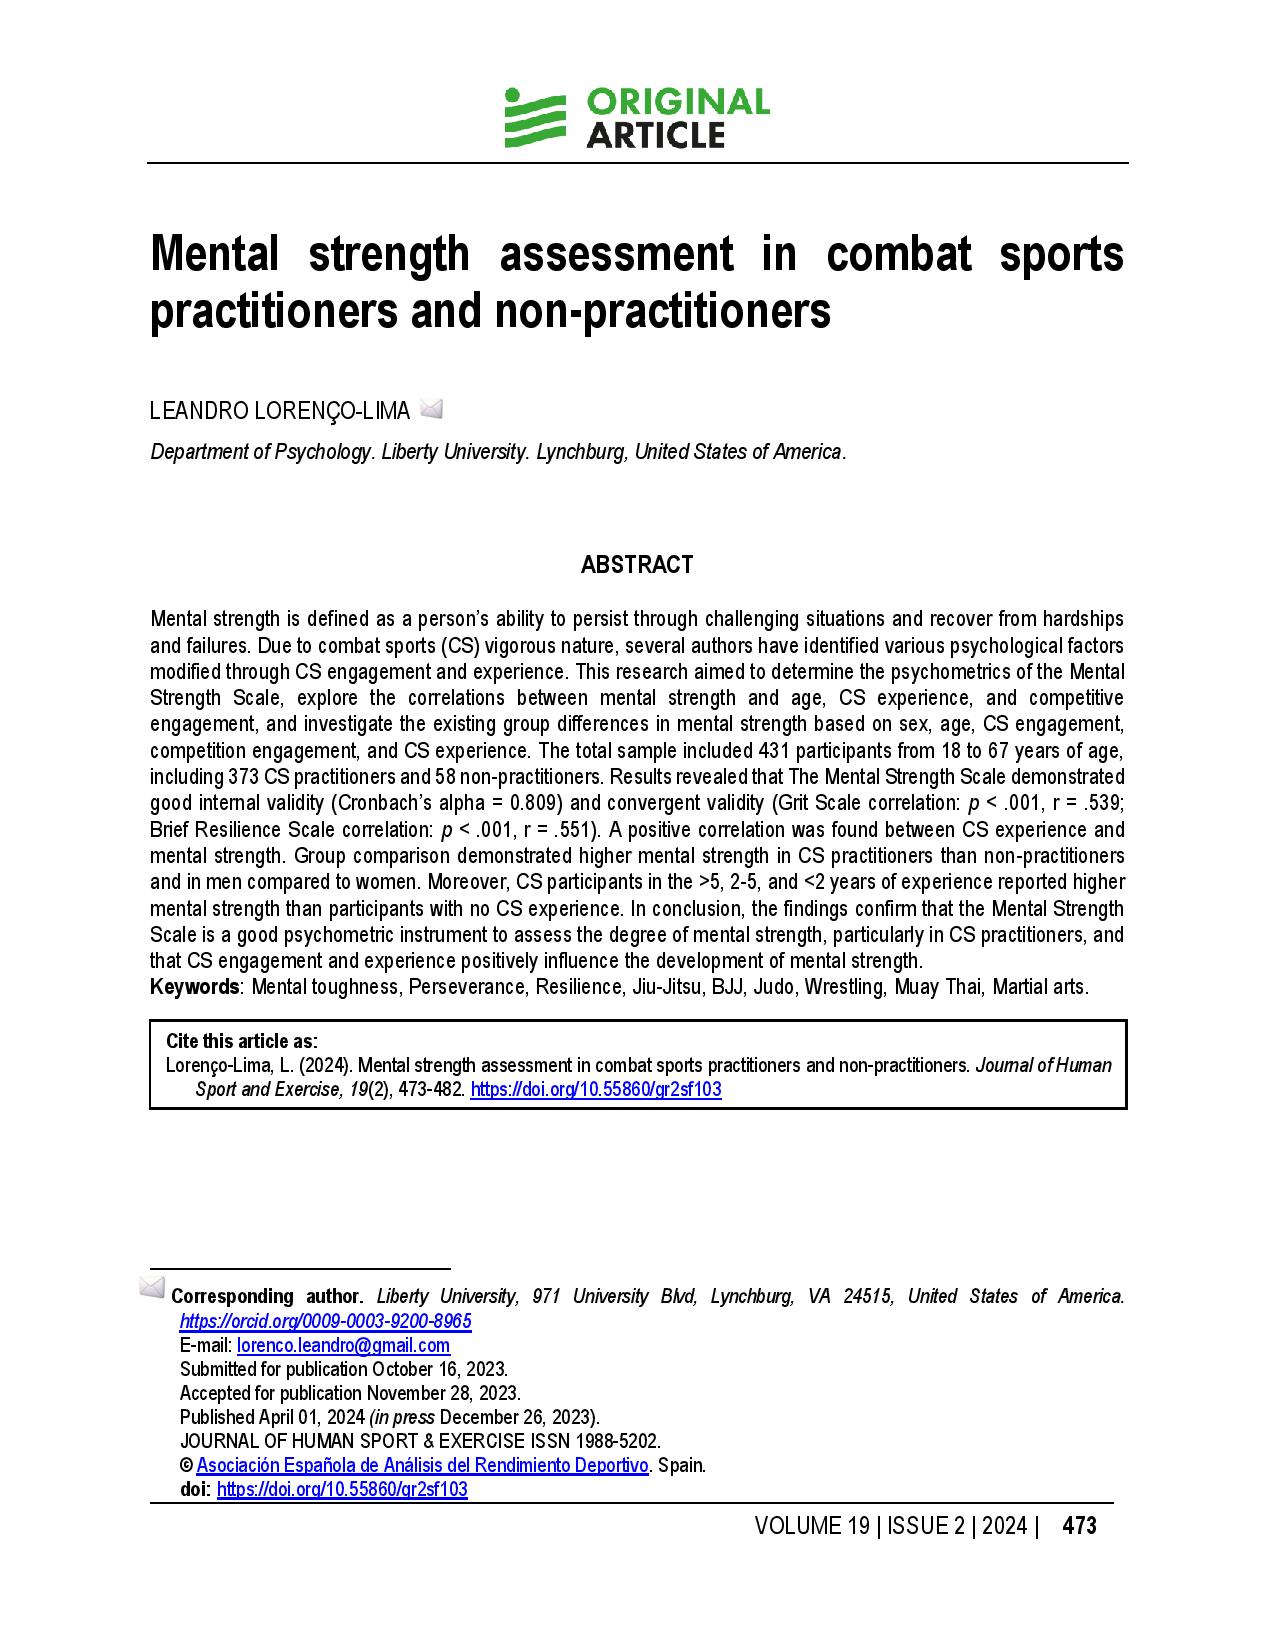 Mental strength assessment in combat sports practitioners and non-practitioners